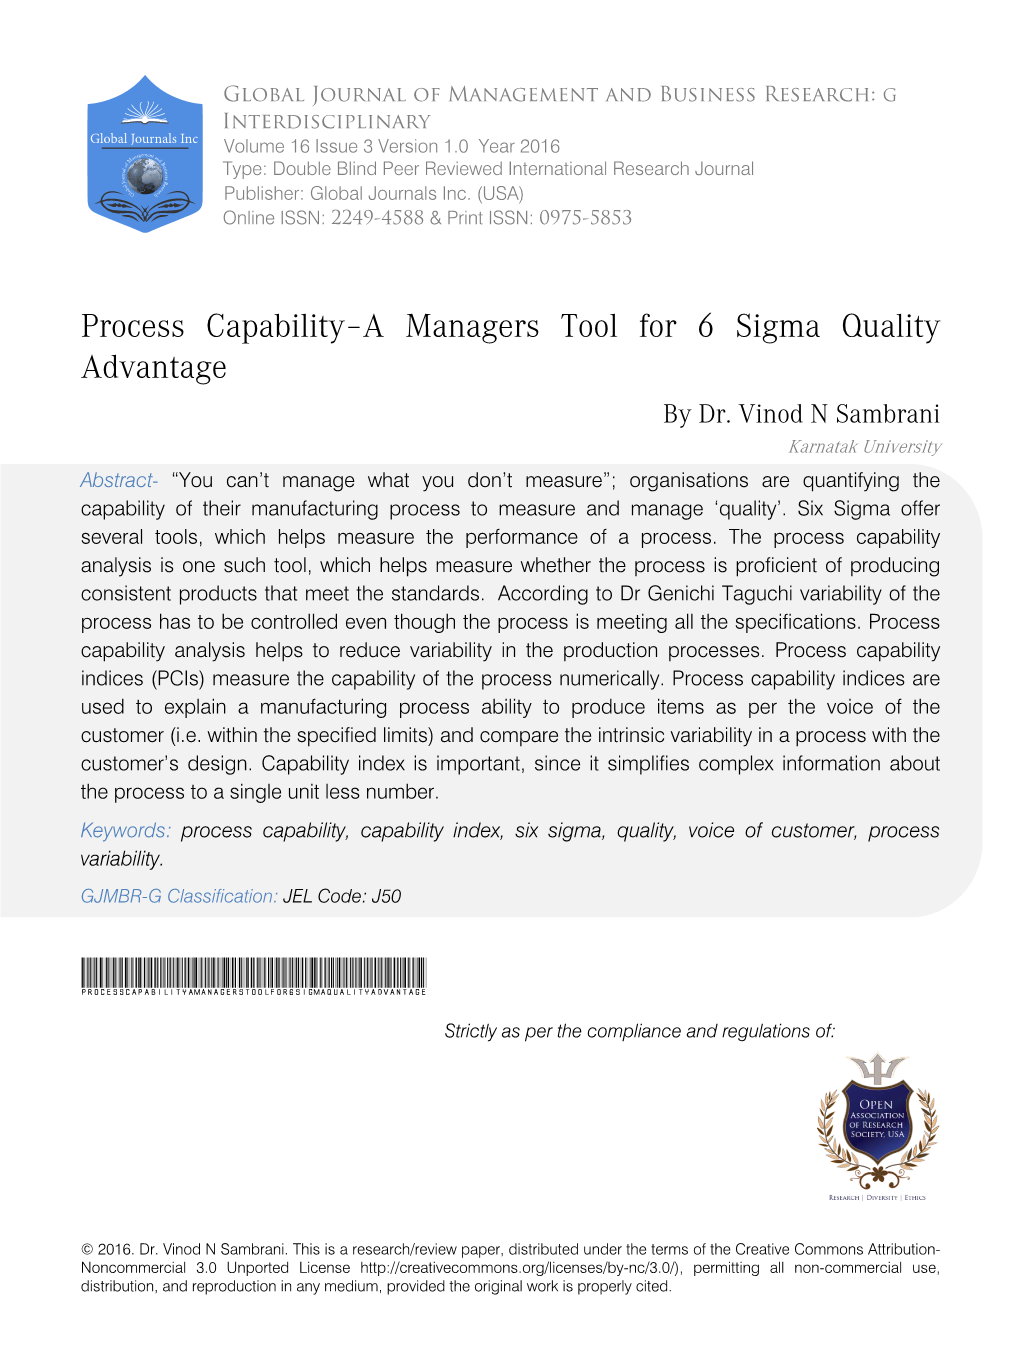 Process Capability–A Managers Tool for 6 Sigma Quality Advantage by Dr